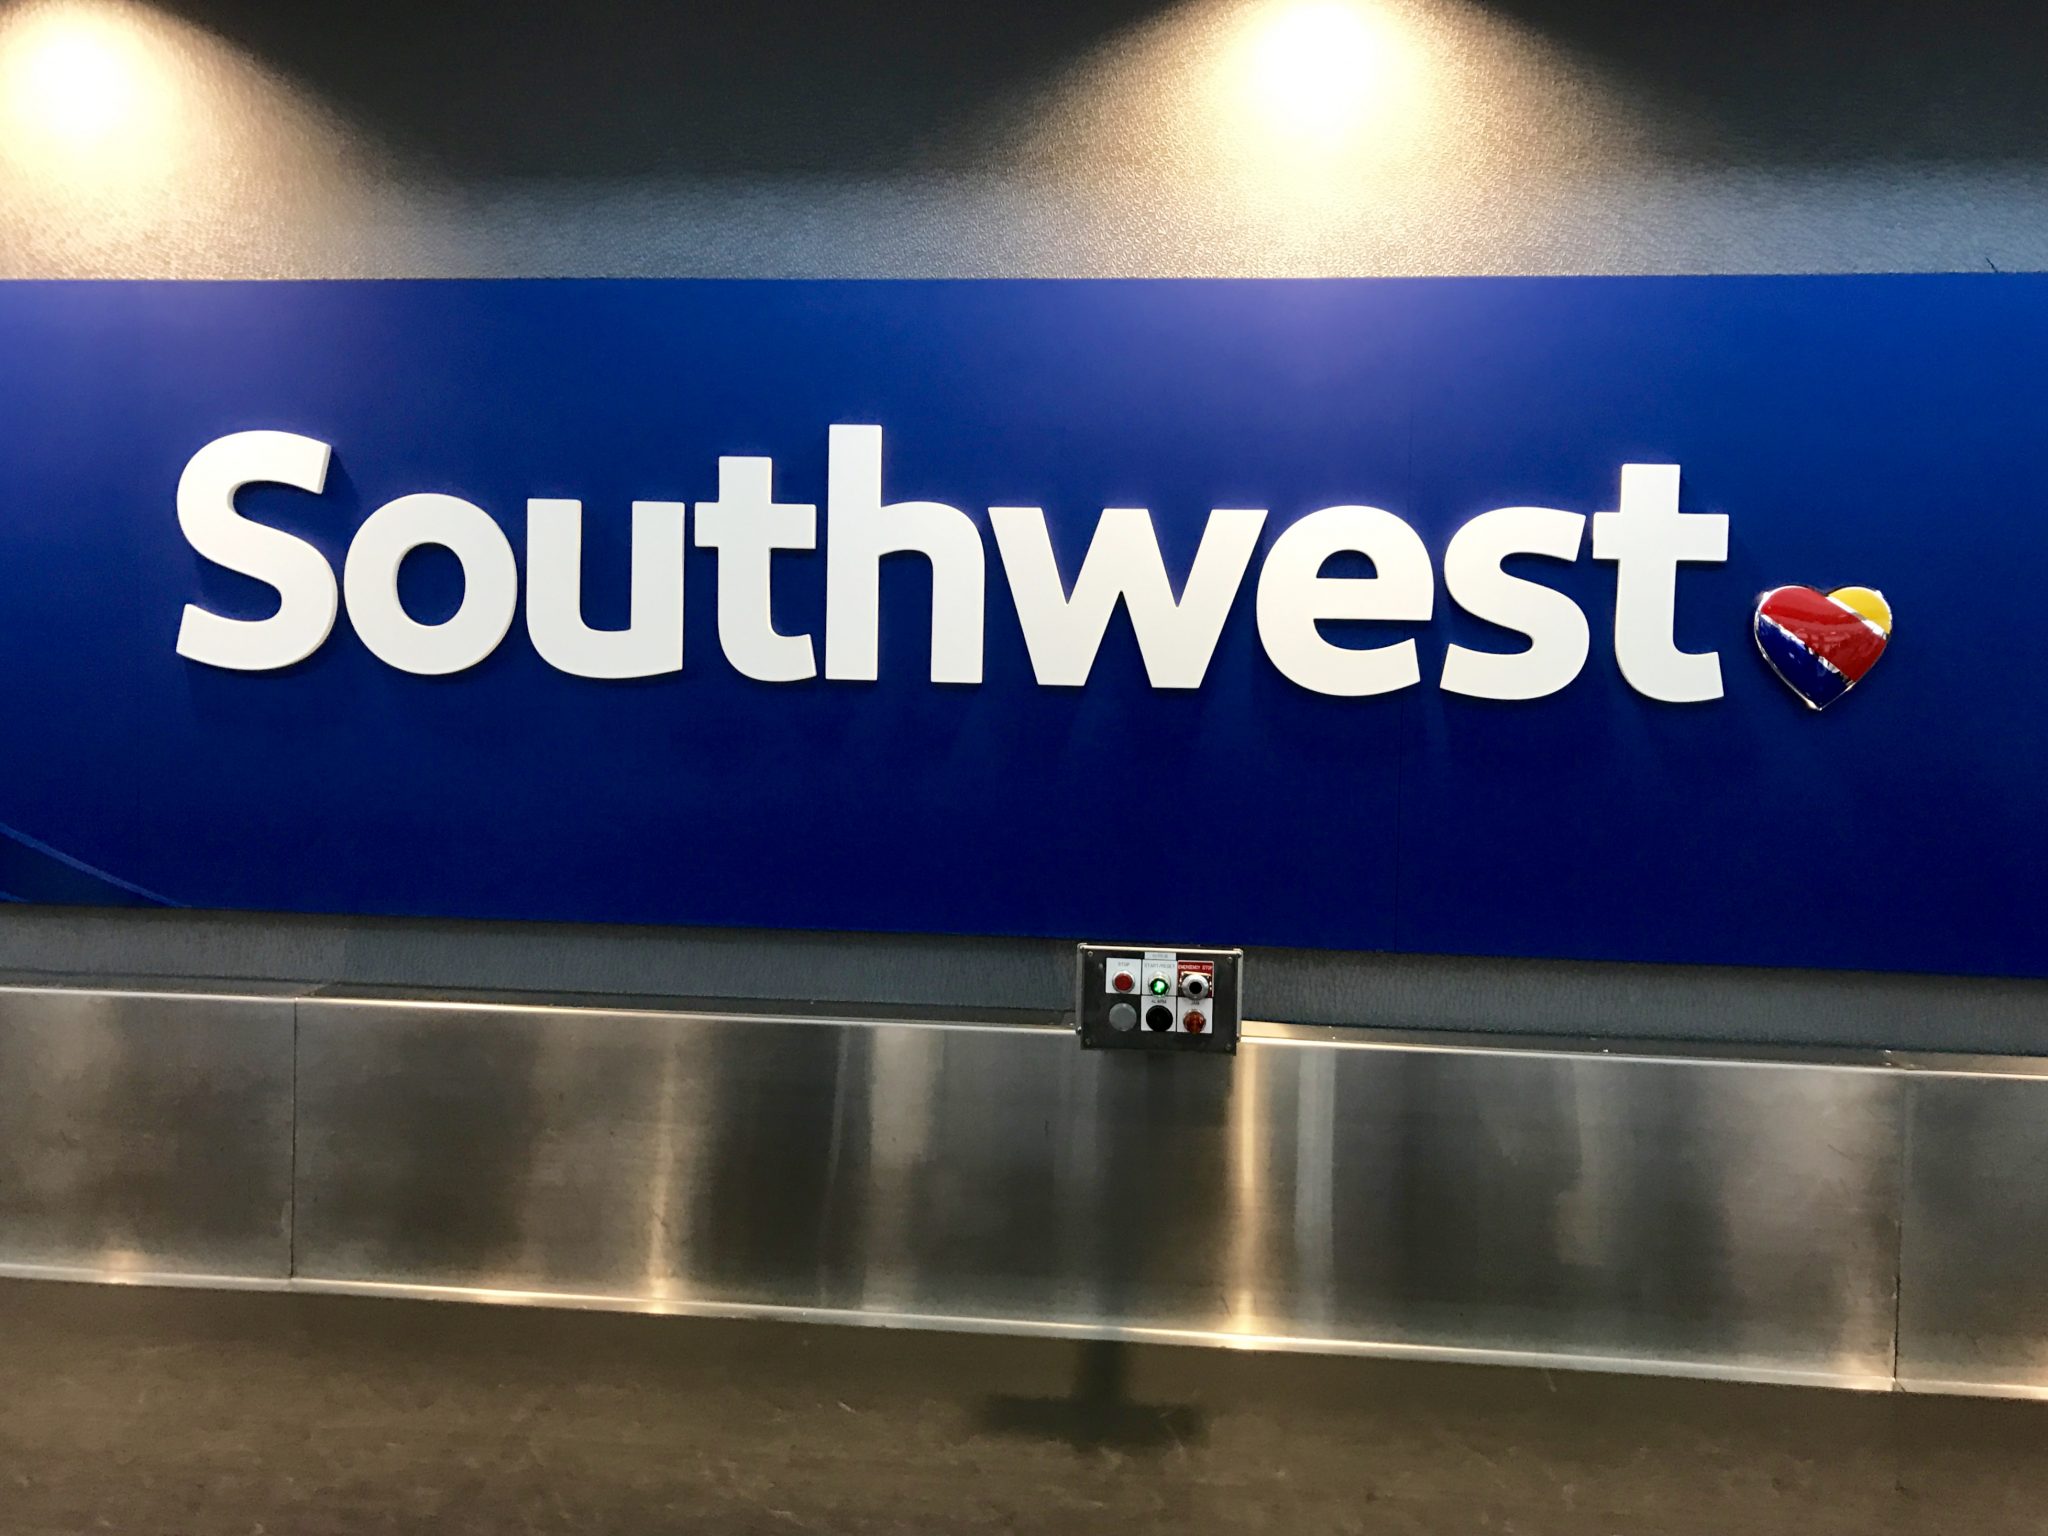 Why We Love Flying With Southwest!